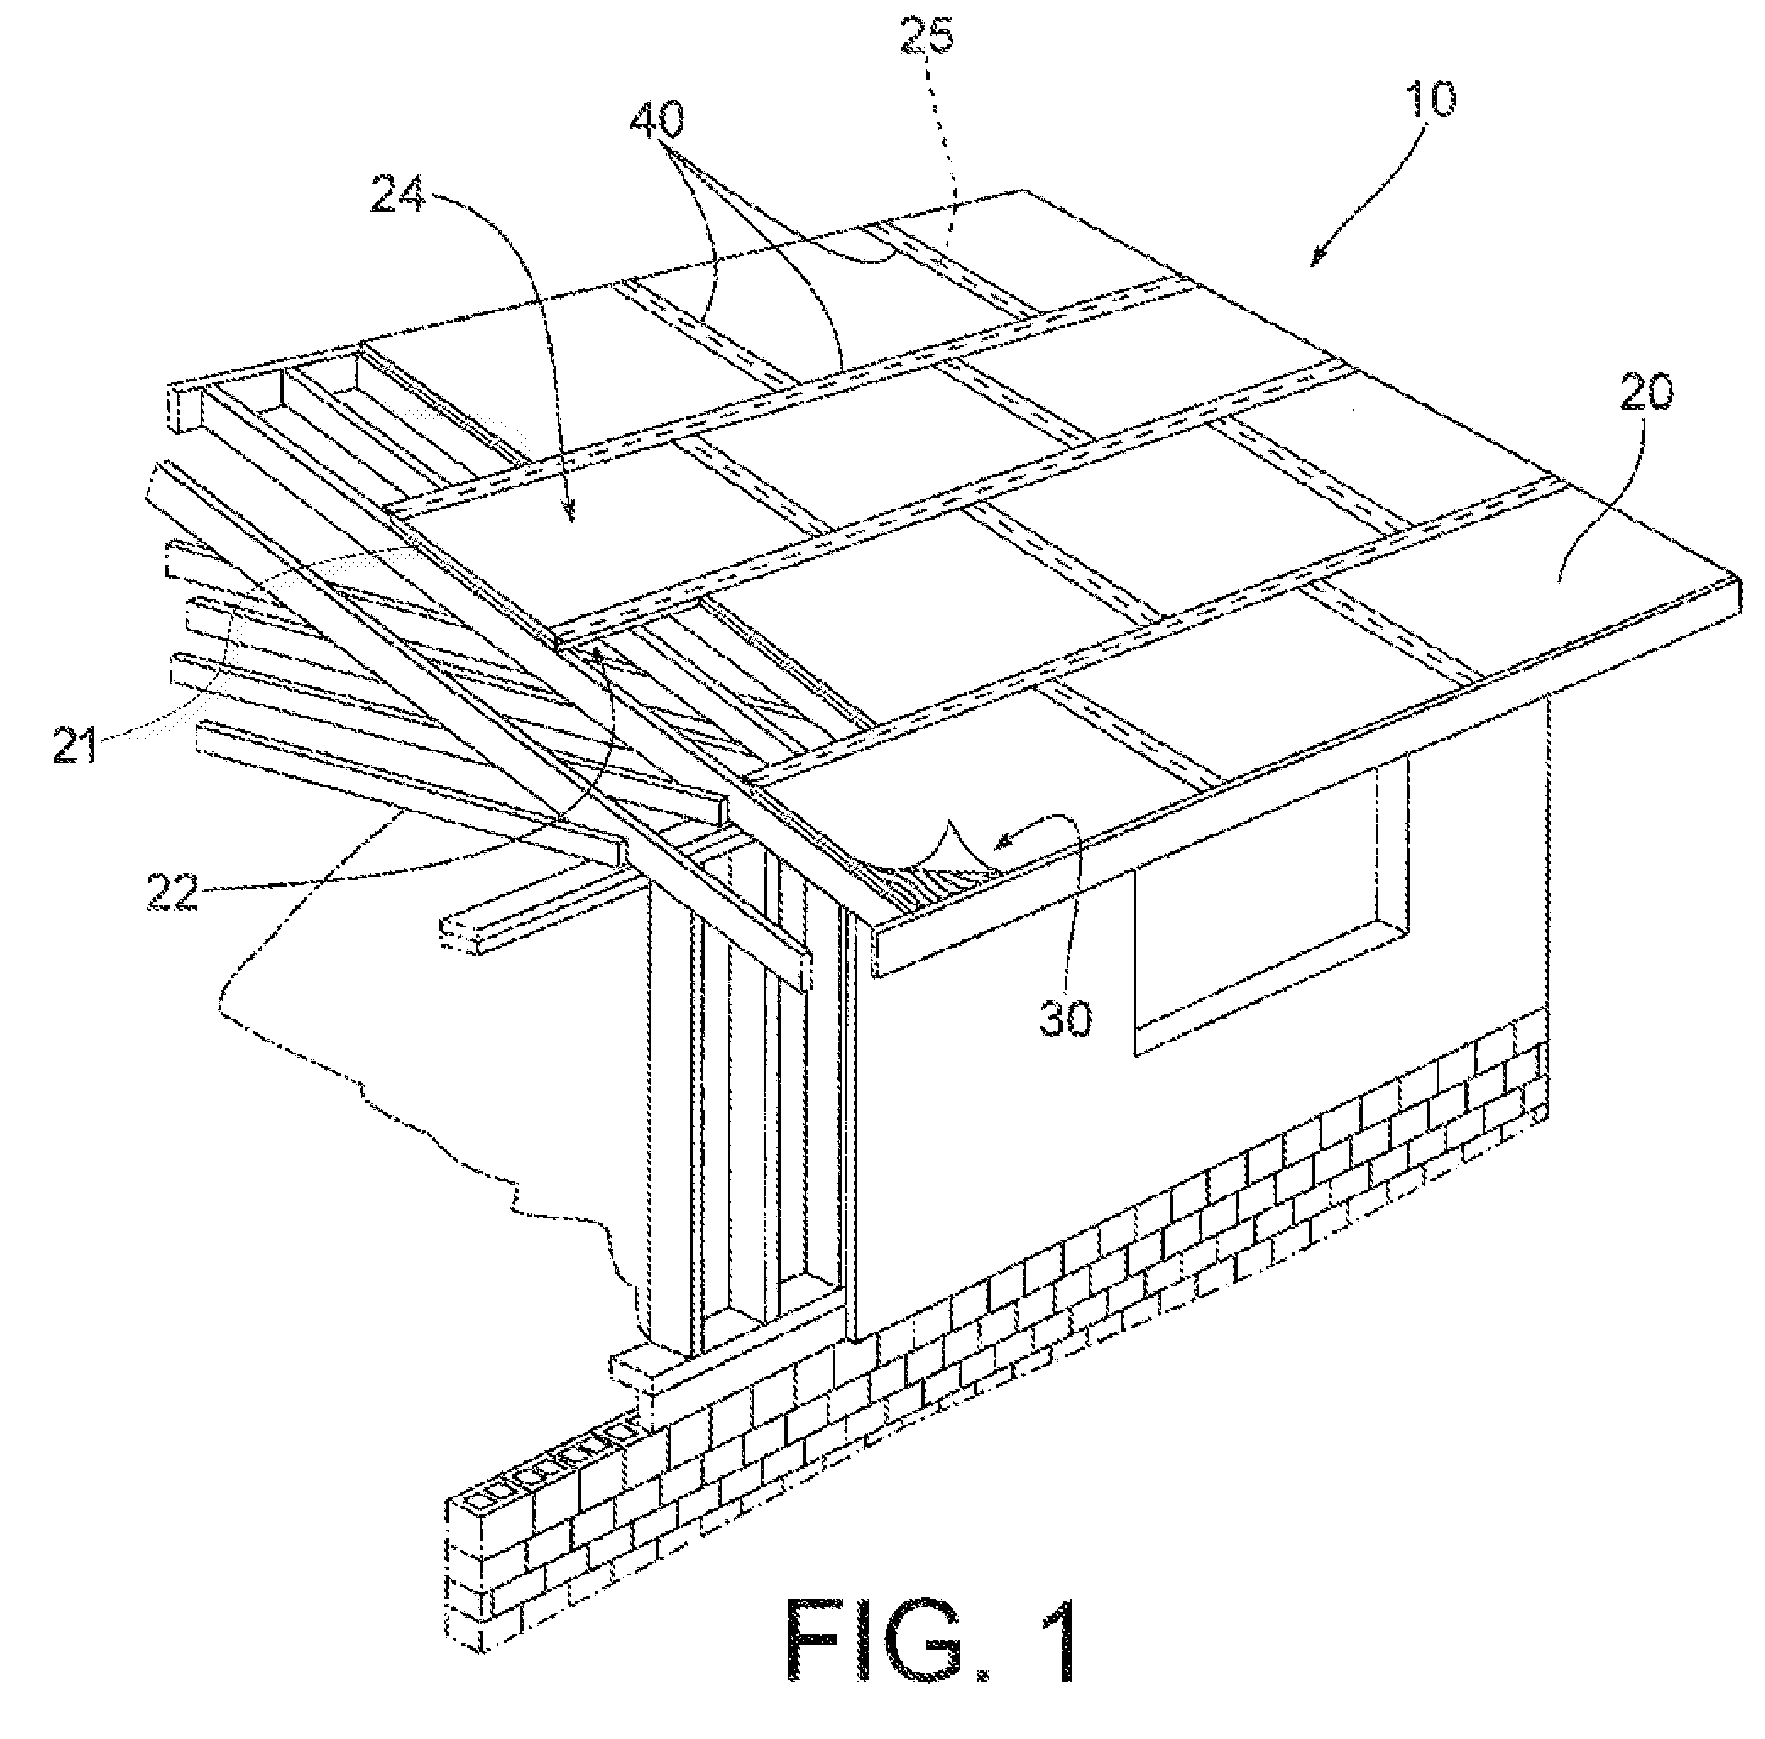 Insulated sheathing panel and methods for use and manufacture thereof